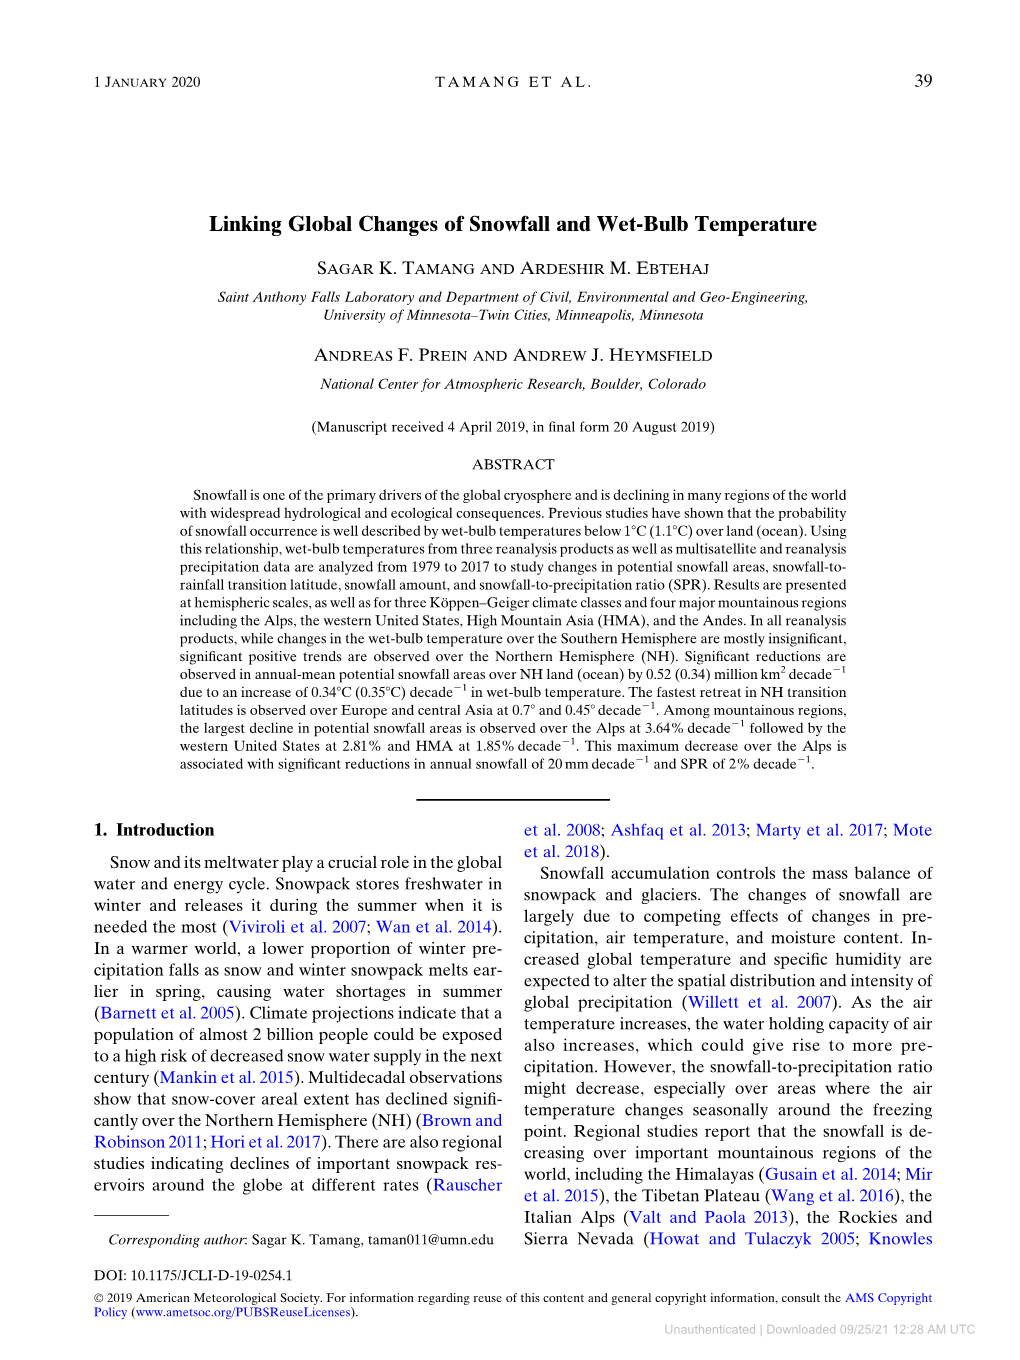 Linking Global Changes of Snowfall and Wet-Bulb Temperature